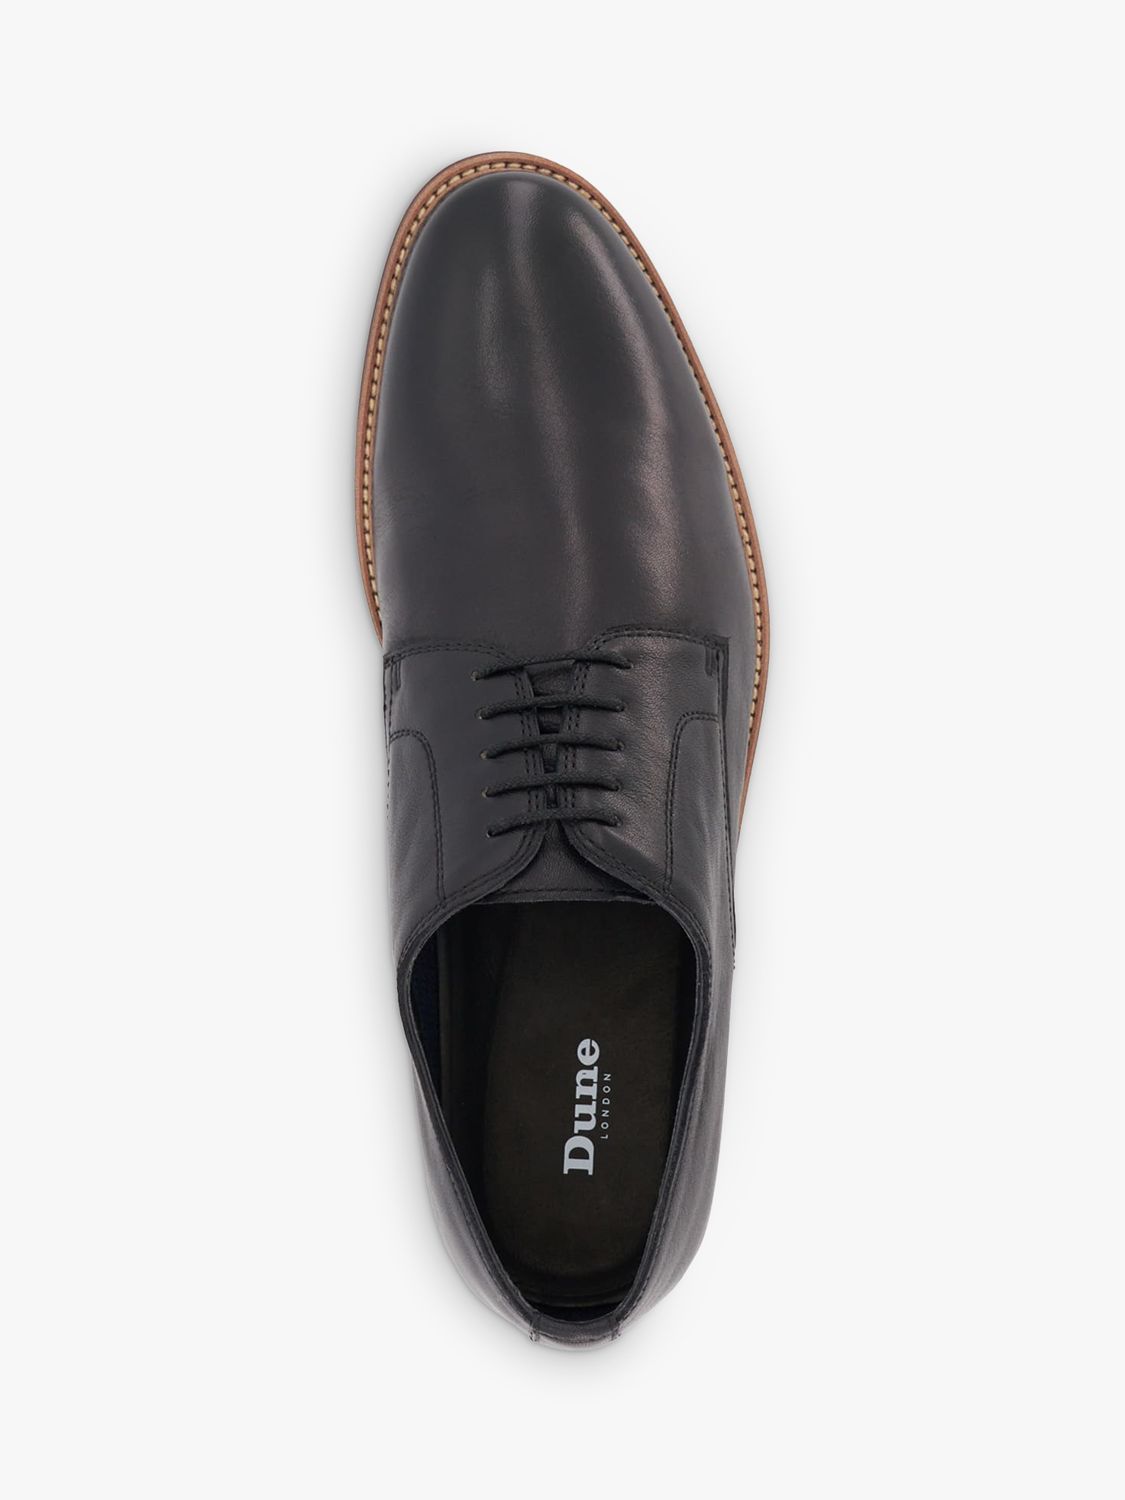 Buy Dune Stanley Leather Derby Shoes Online at johnlewis.com